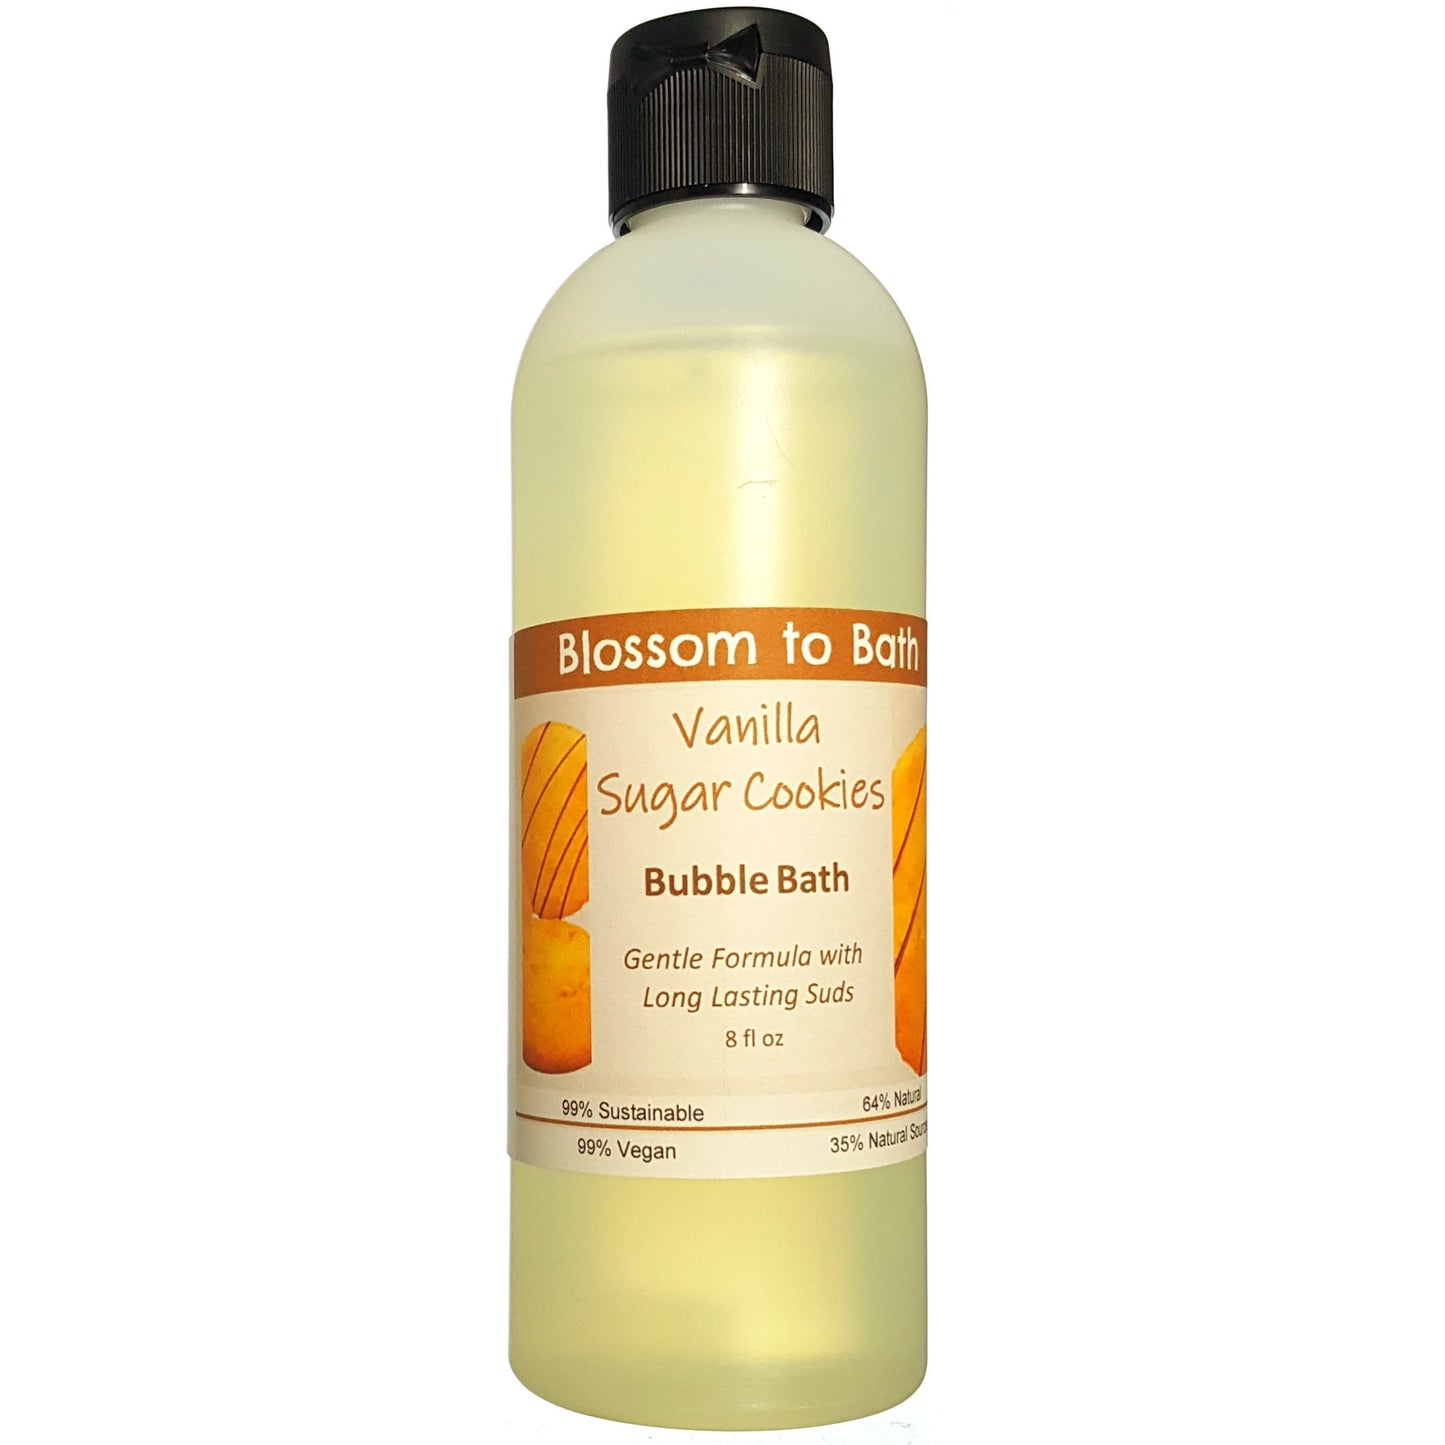 Buy Blossom to Bath Vanilla Sugar Cookies Bubble Bath from Flowersong Soap Studio.  Lively, long lasting  bubbles in a gentle plant based formula for maximum relaxation time  Smells like sugar cookies in the oven.